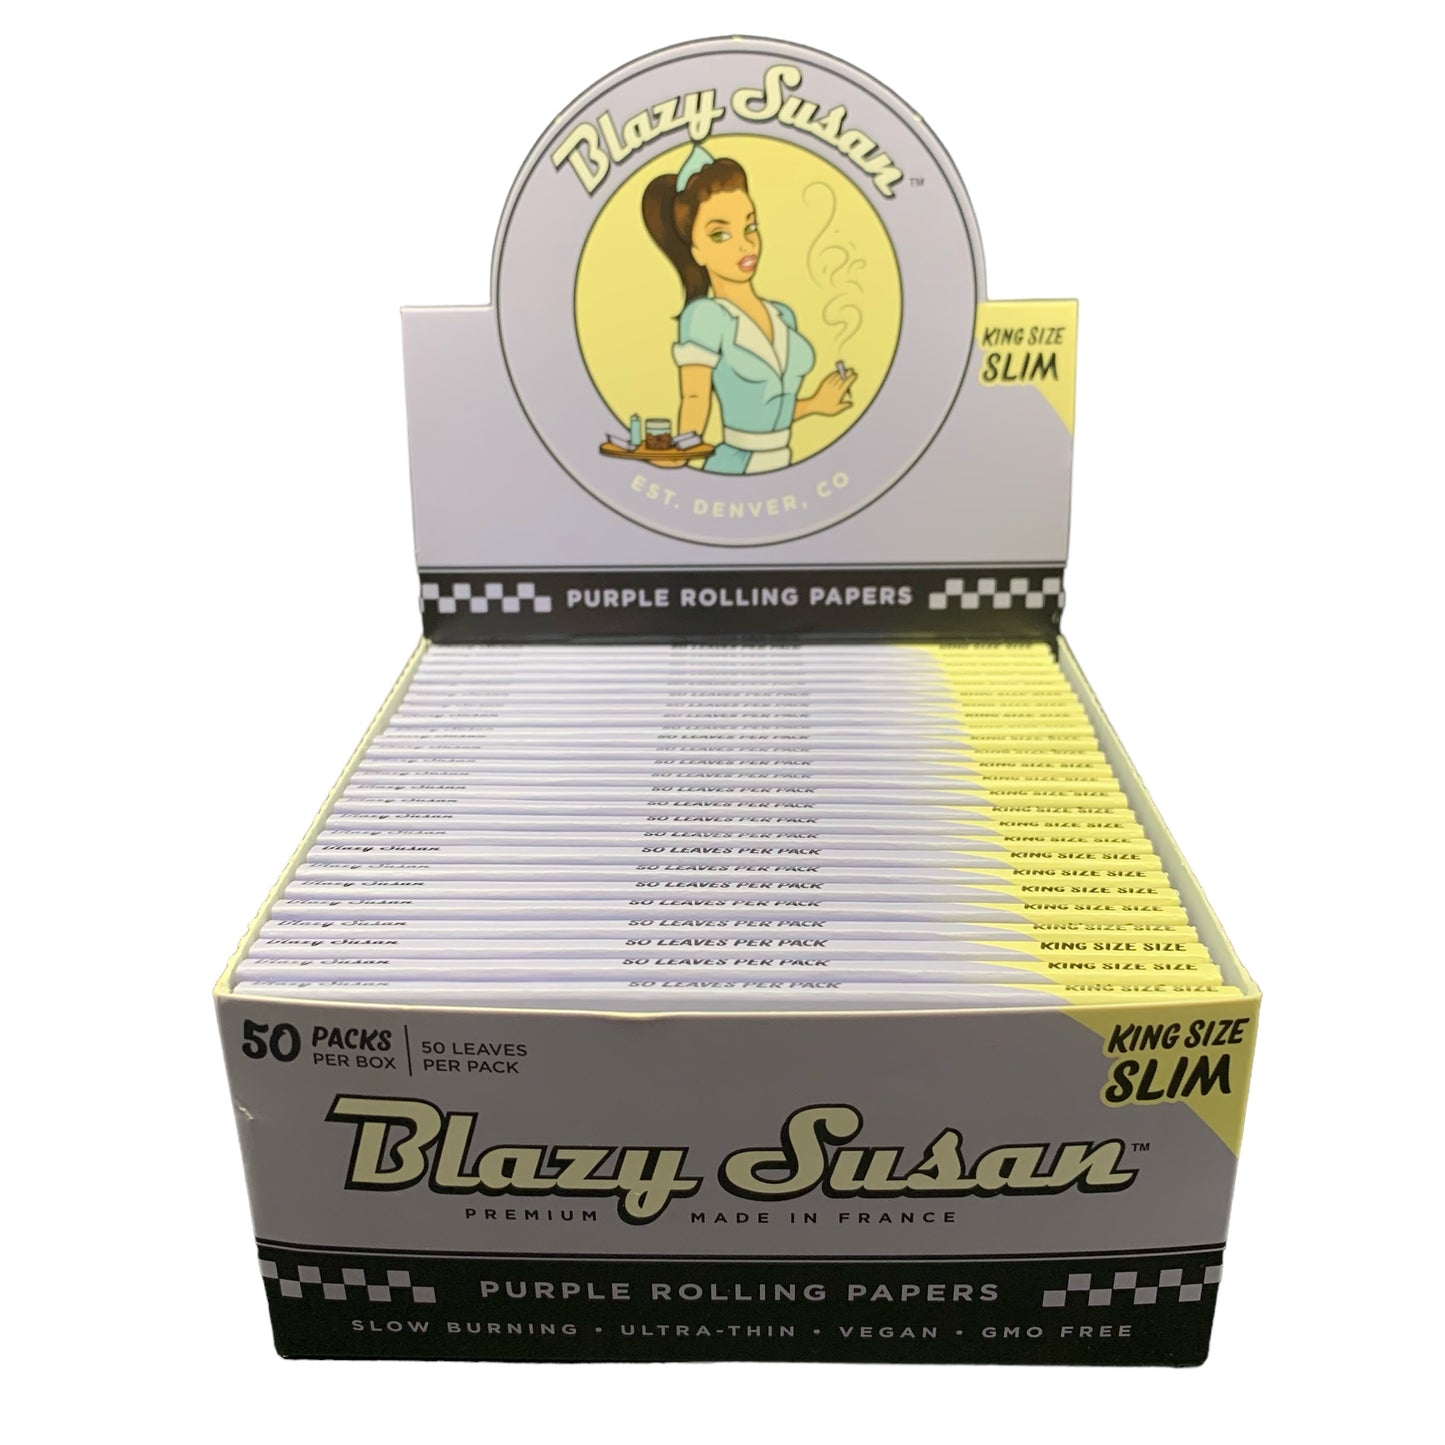 Blazy Susan Rolling Papers - King Size Slim, 50 Leaves Per Booklet, 50 Booklets Per Box (Various Colors Available) (B2B)